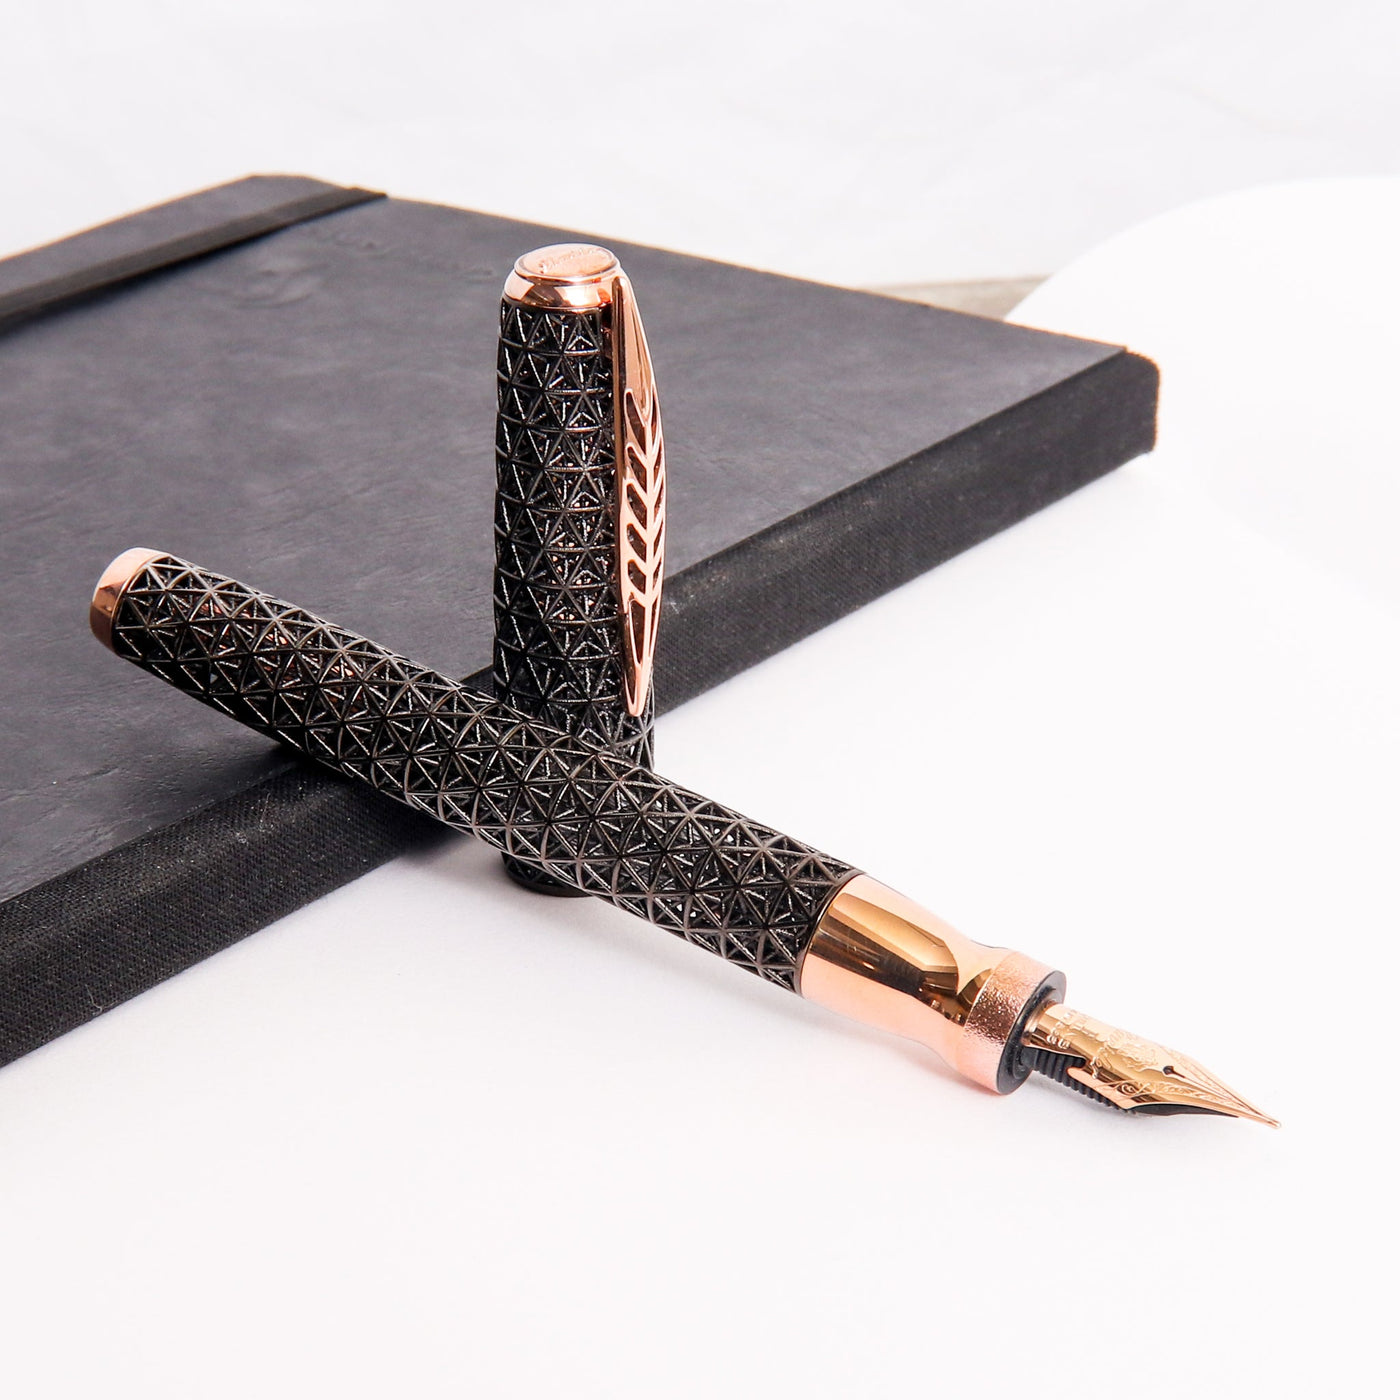 Pineider Psycho Black with Rose Gold Trim Fountain Pen Uncapped